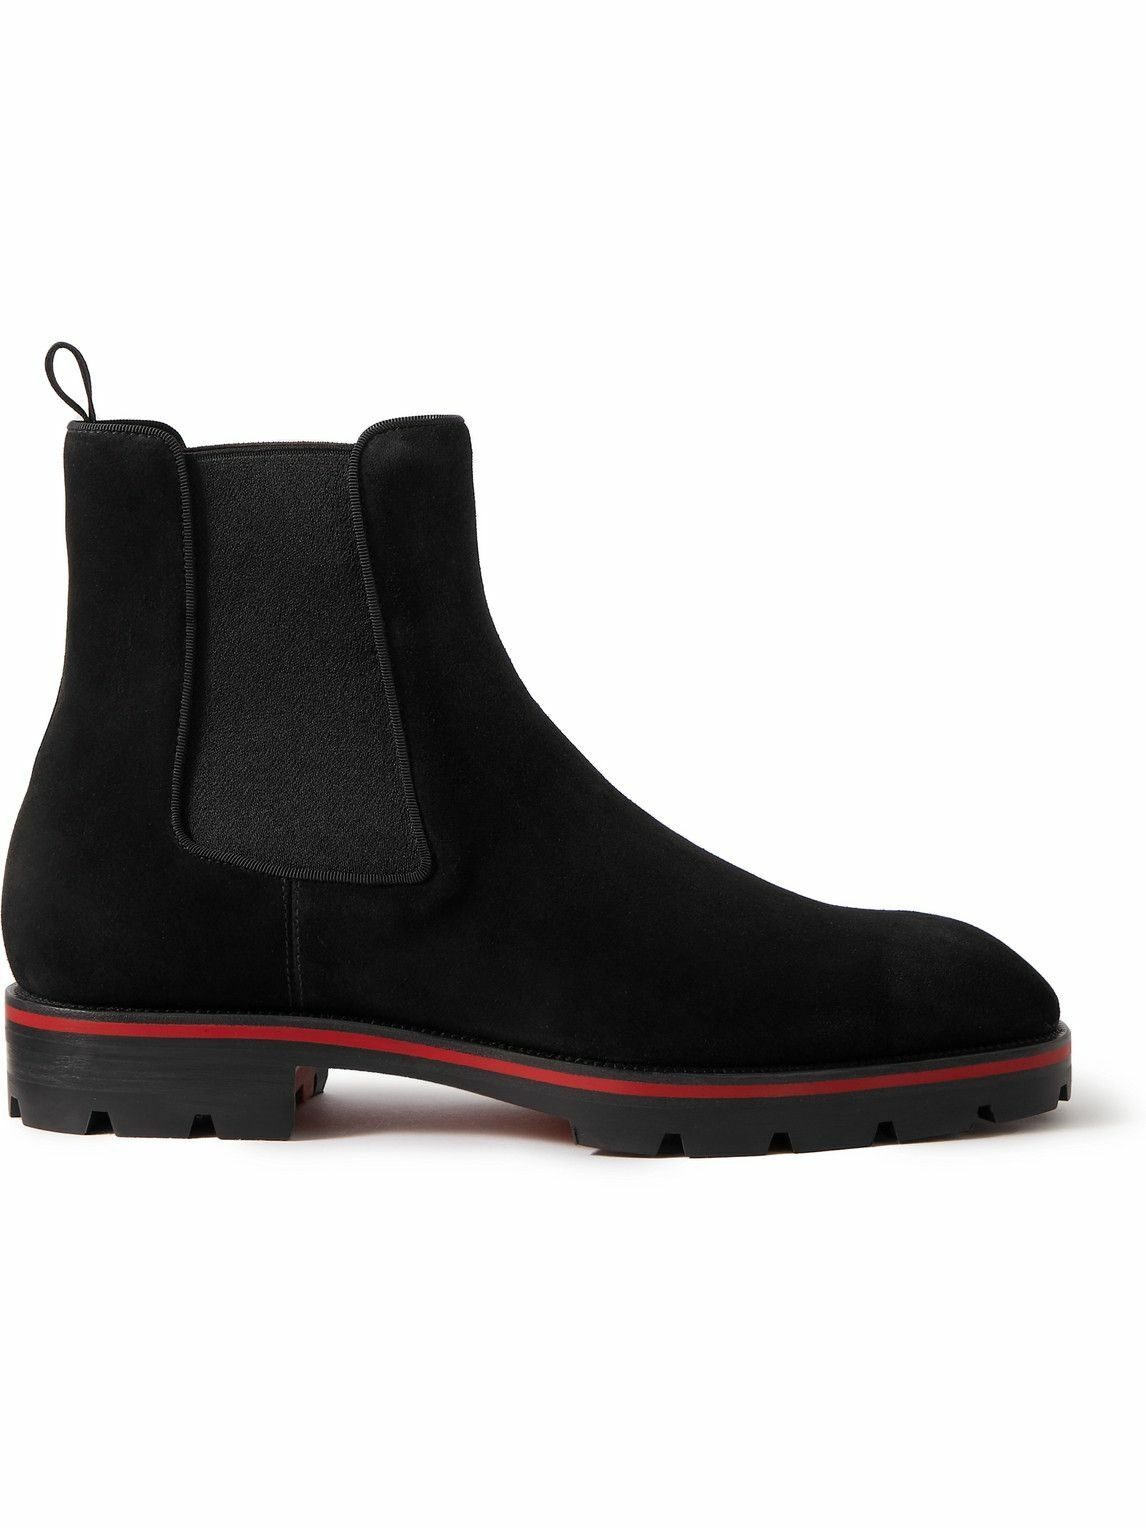 Christian Louboutin - Alpino Waxed-Suede Chelsea Boots - Black ...